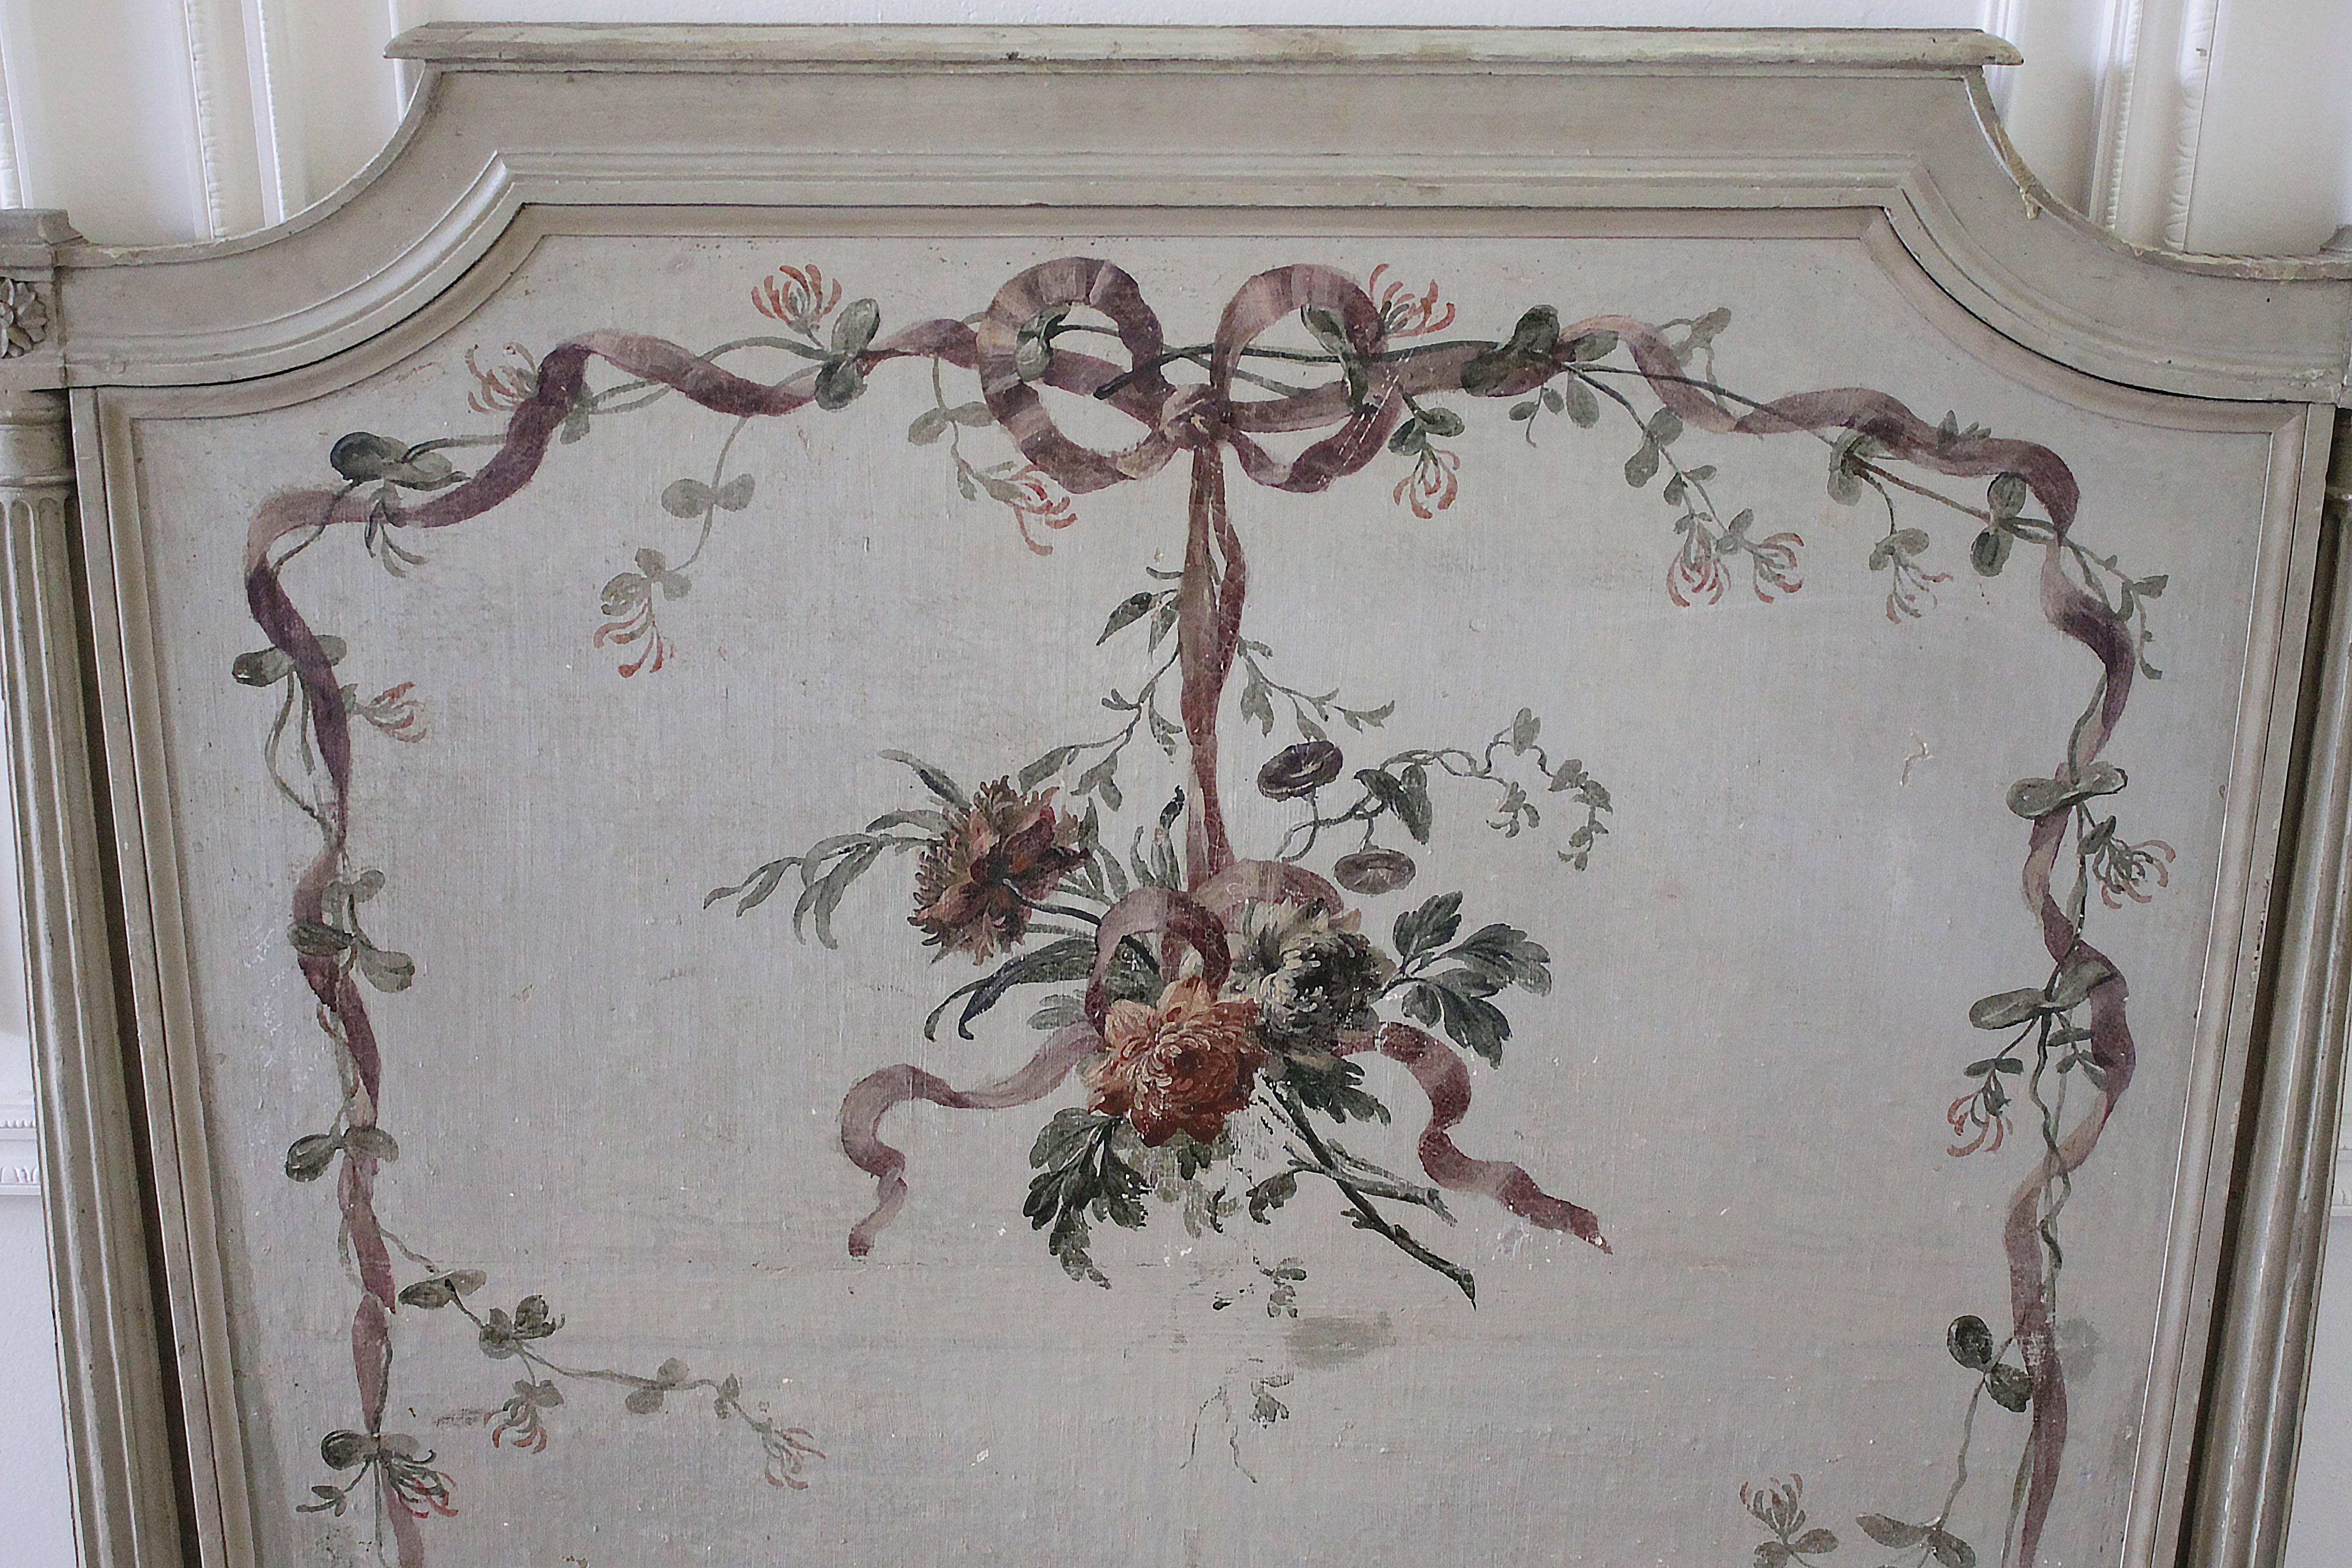 One of my favorite decorative pieces, this originally was a daybed, that was hand-painted on both sides with ribbons and swags and roses on linen. The linen was glued well onto the wood bed plaque, and you can see bits of the painted finish that may